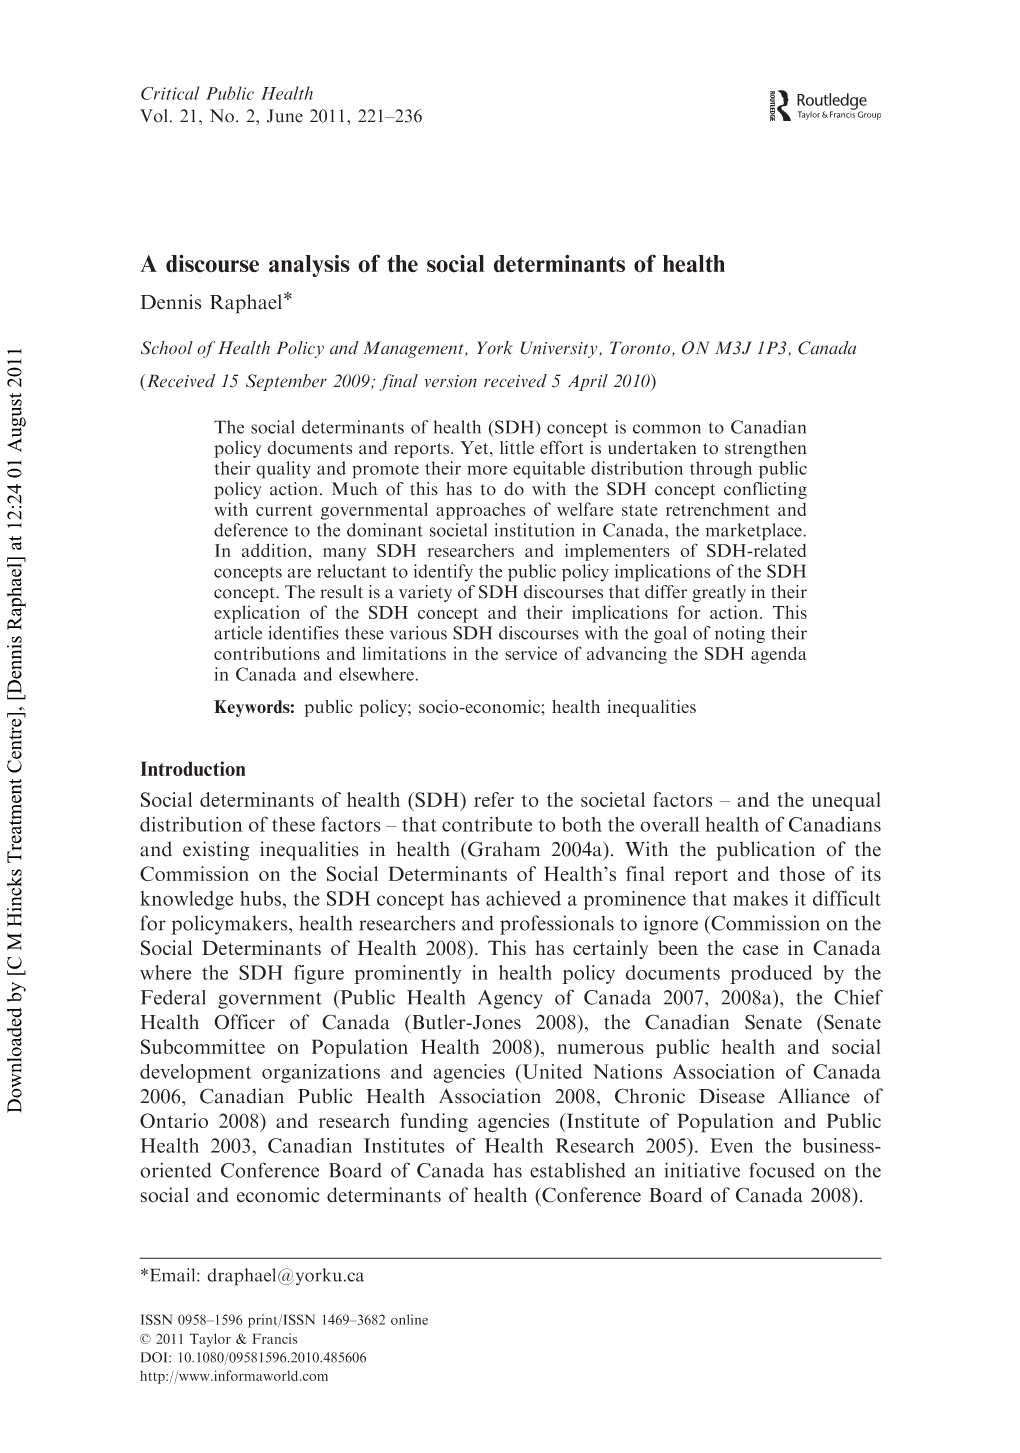 A Discourse Analysis of the Social Determinants of Health Dennis Raphael*